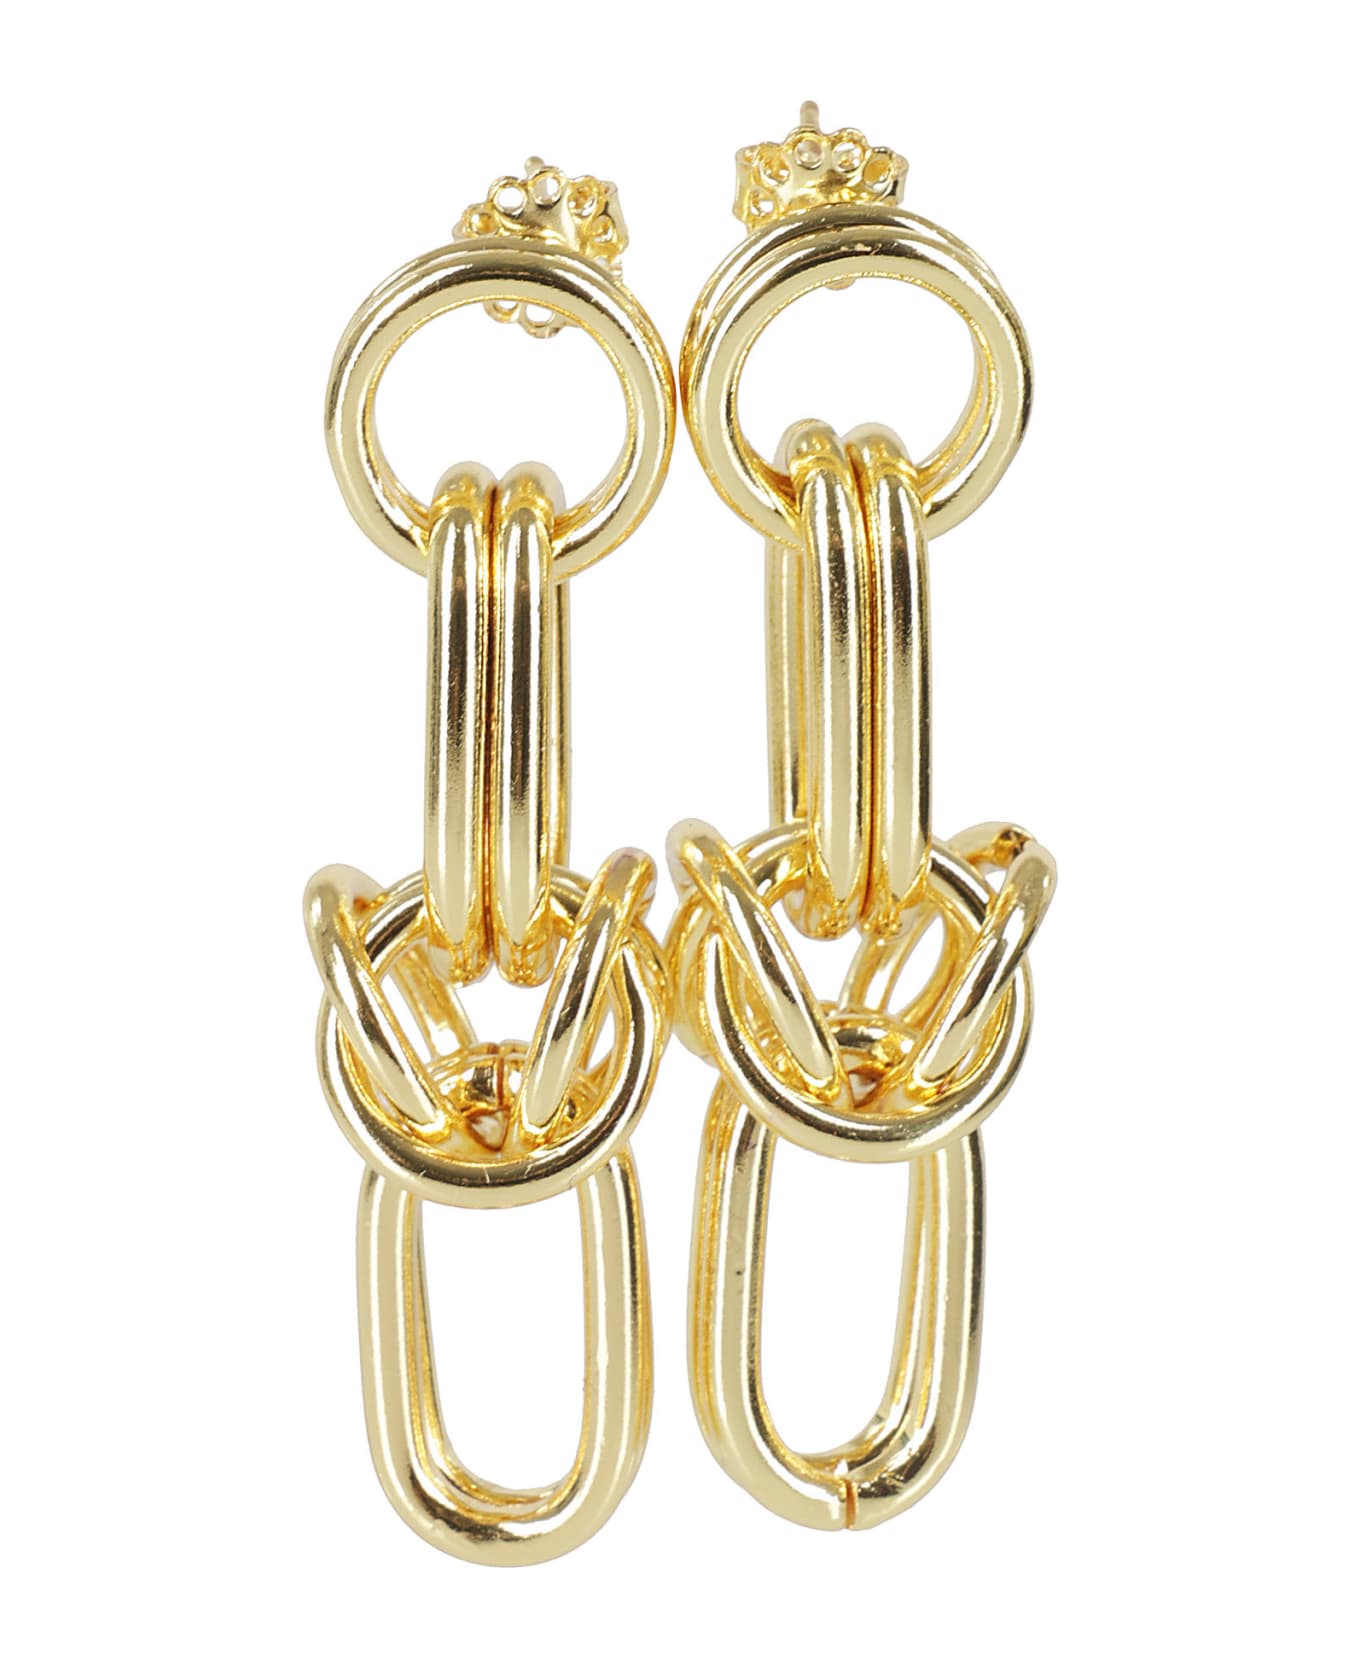 Federica Tosi Earring Cecile - Gold イヤリング